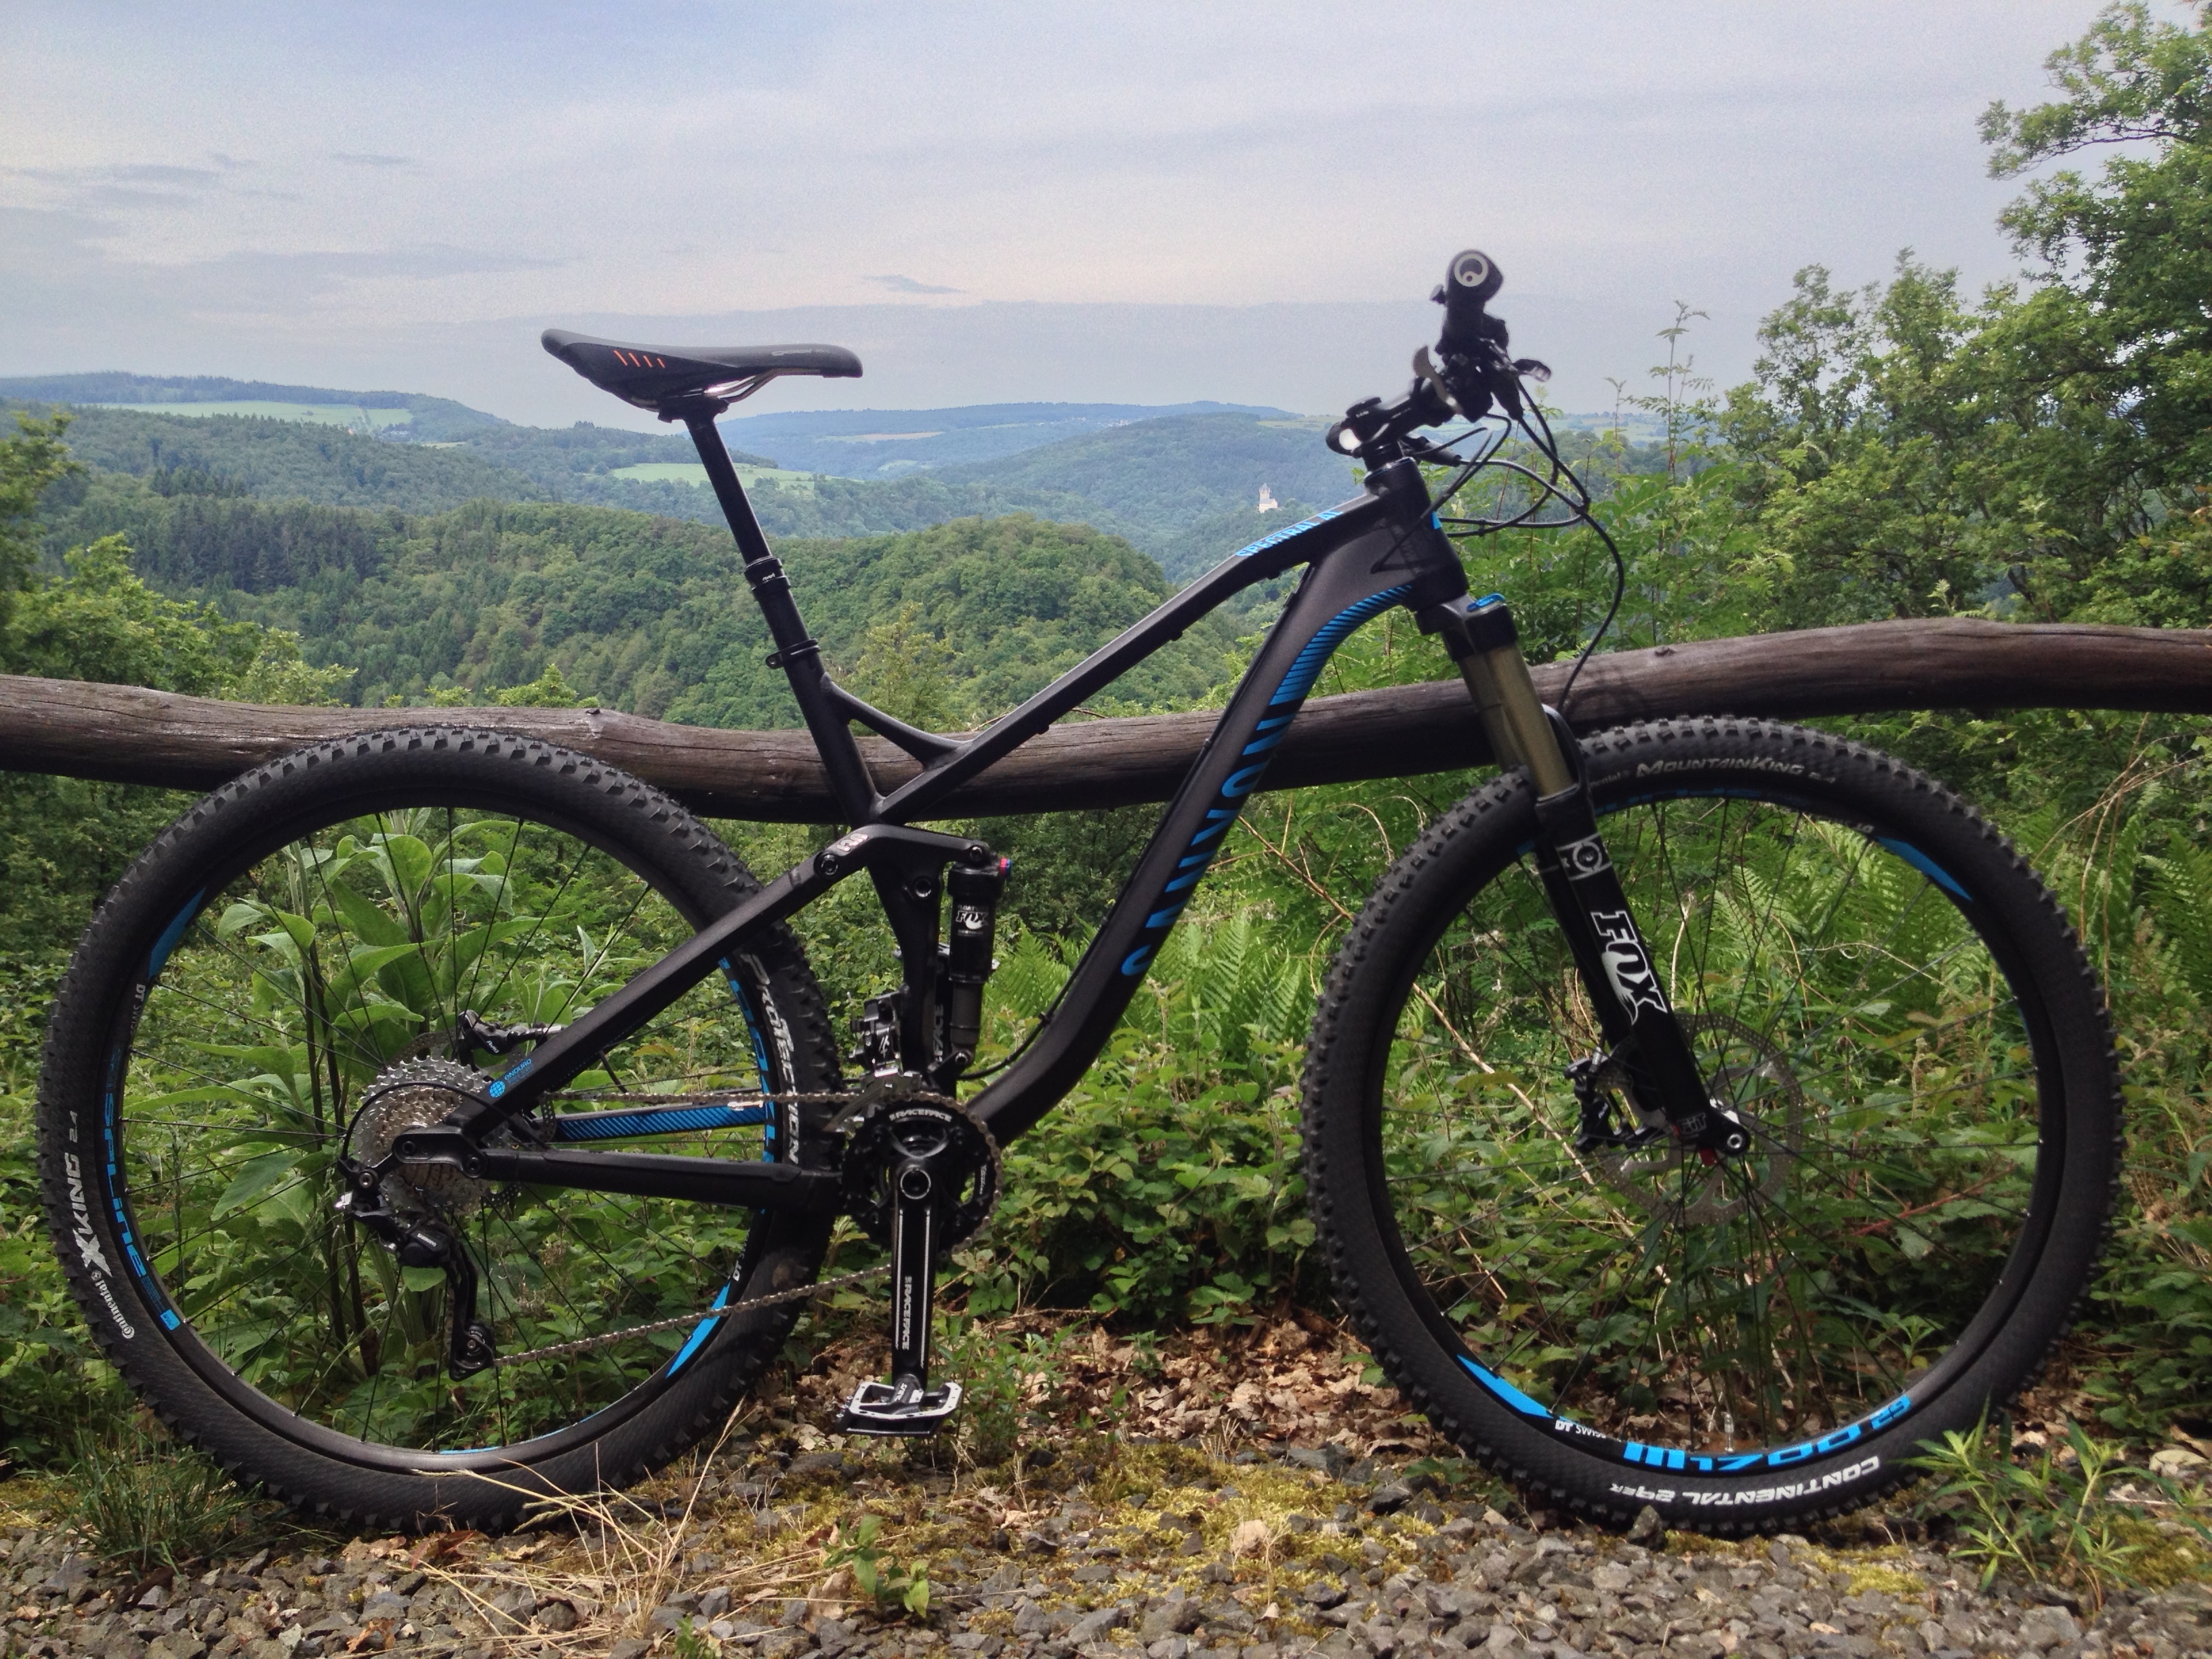 canyon spectral 7.9